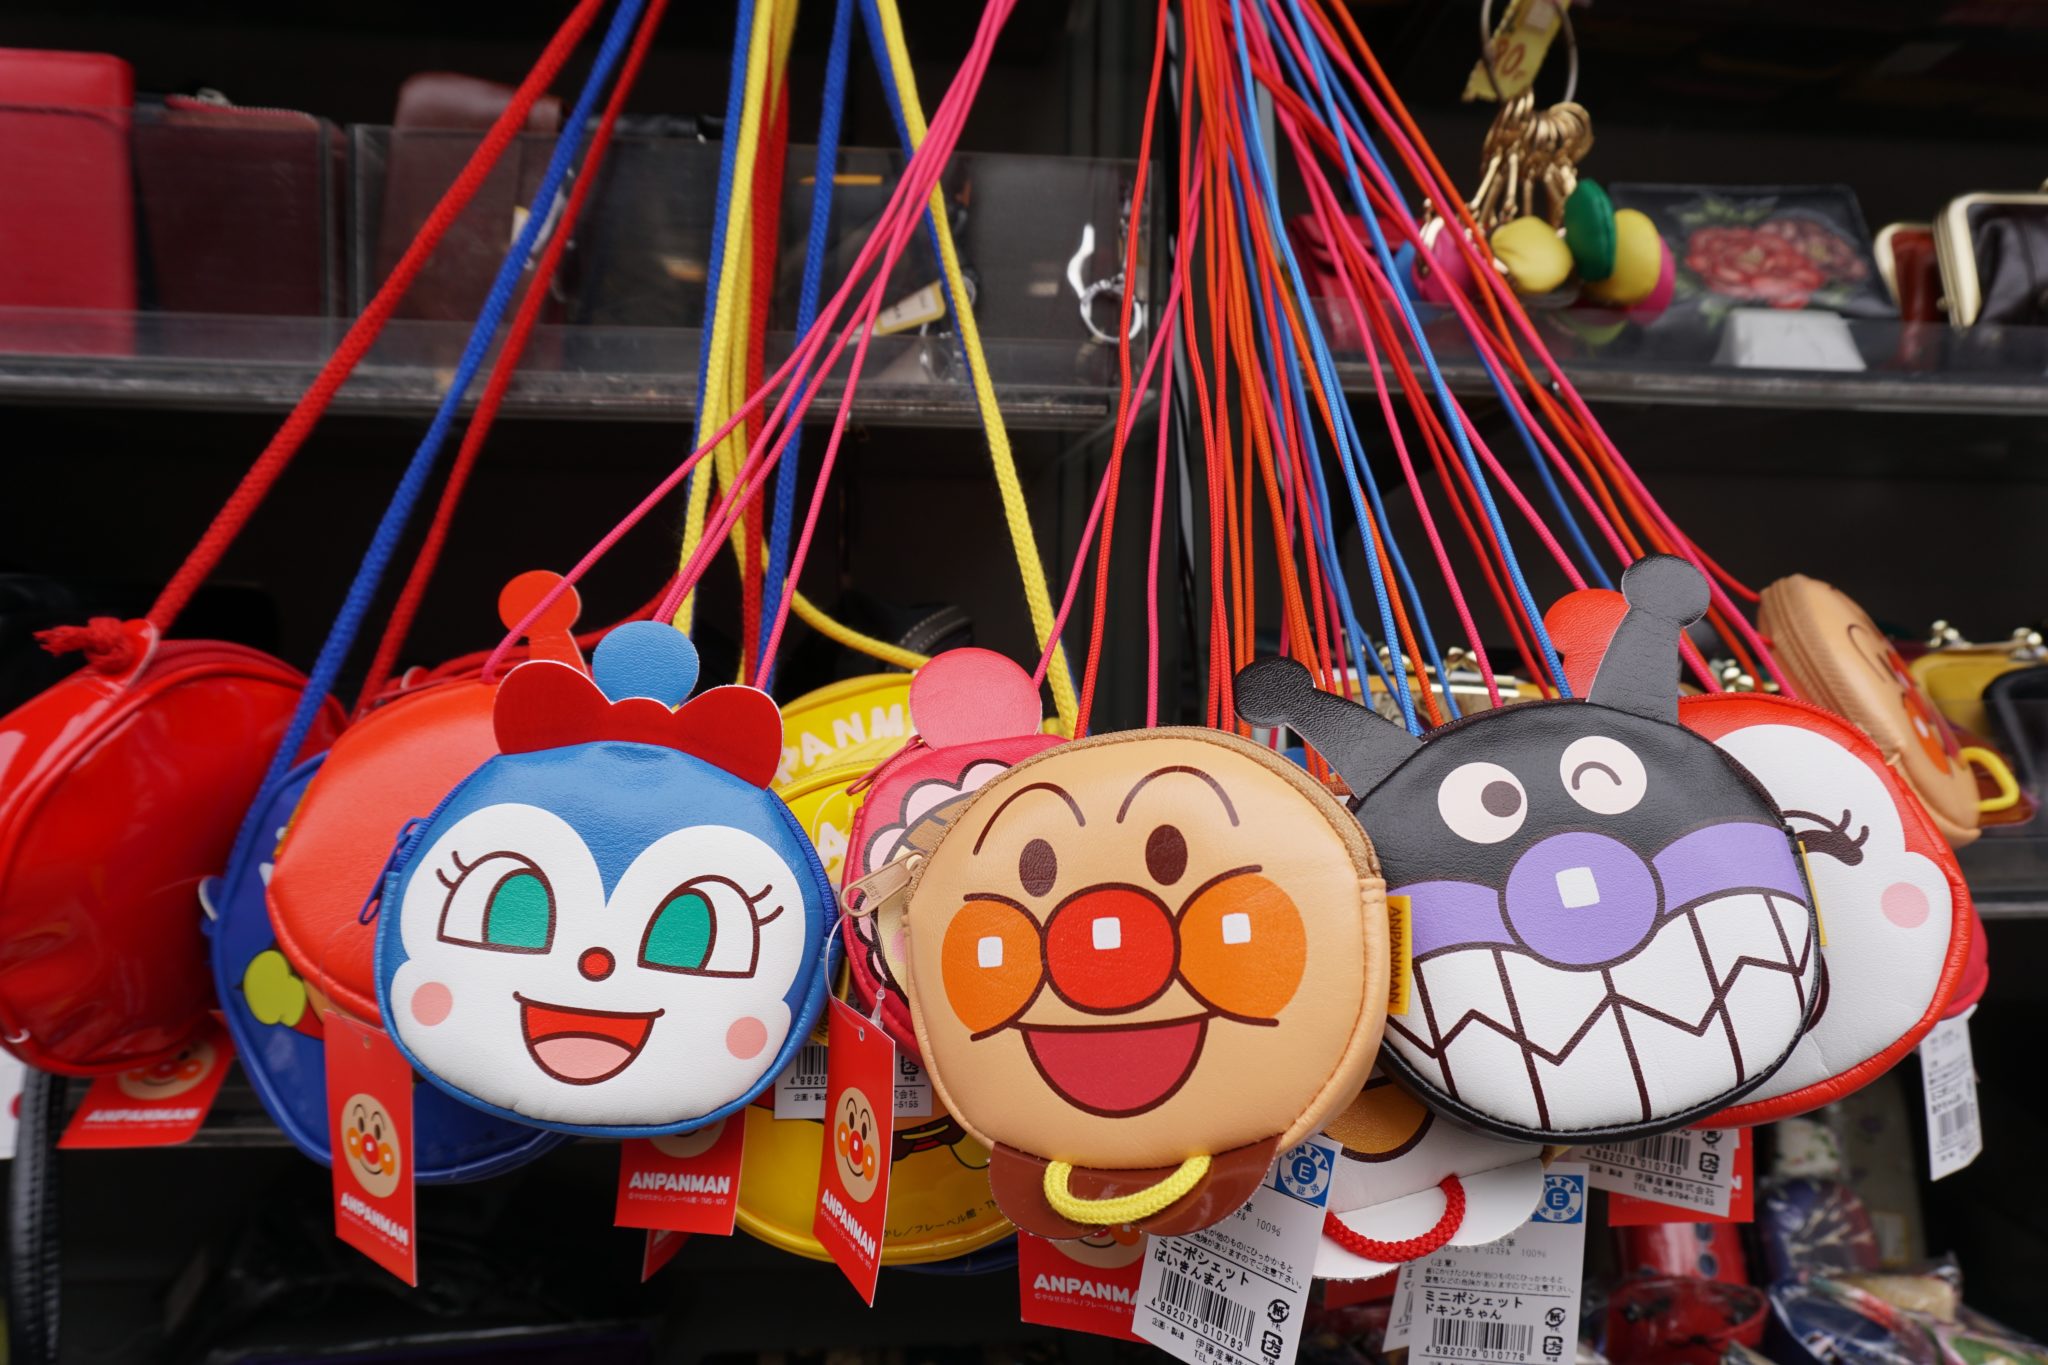 Shopping for Kawaii Souvenirs, the Japanese Culture of Cute